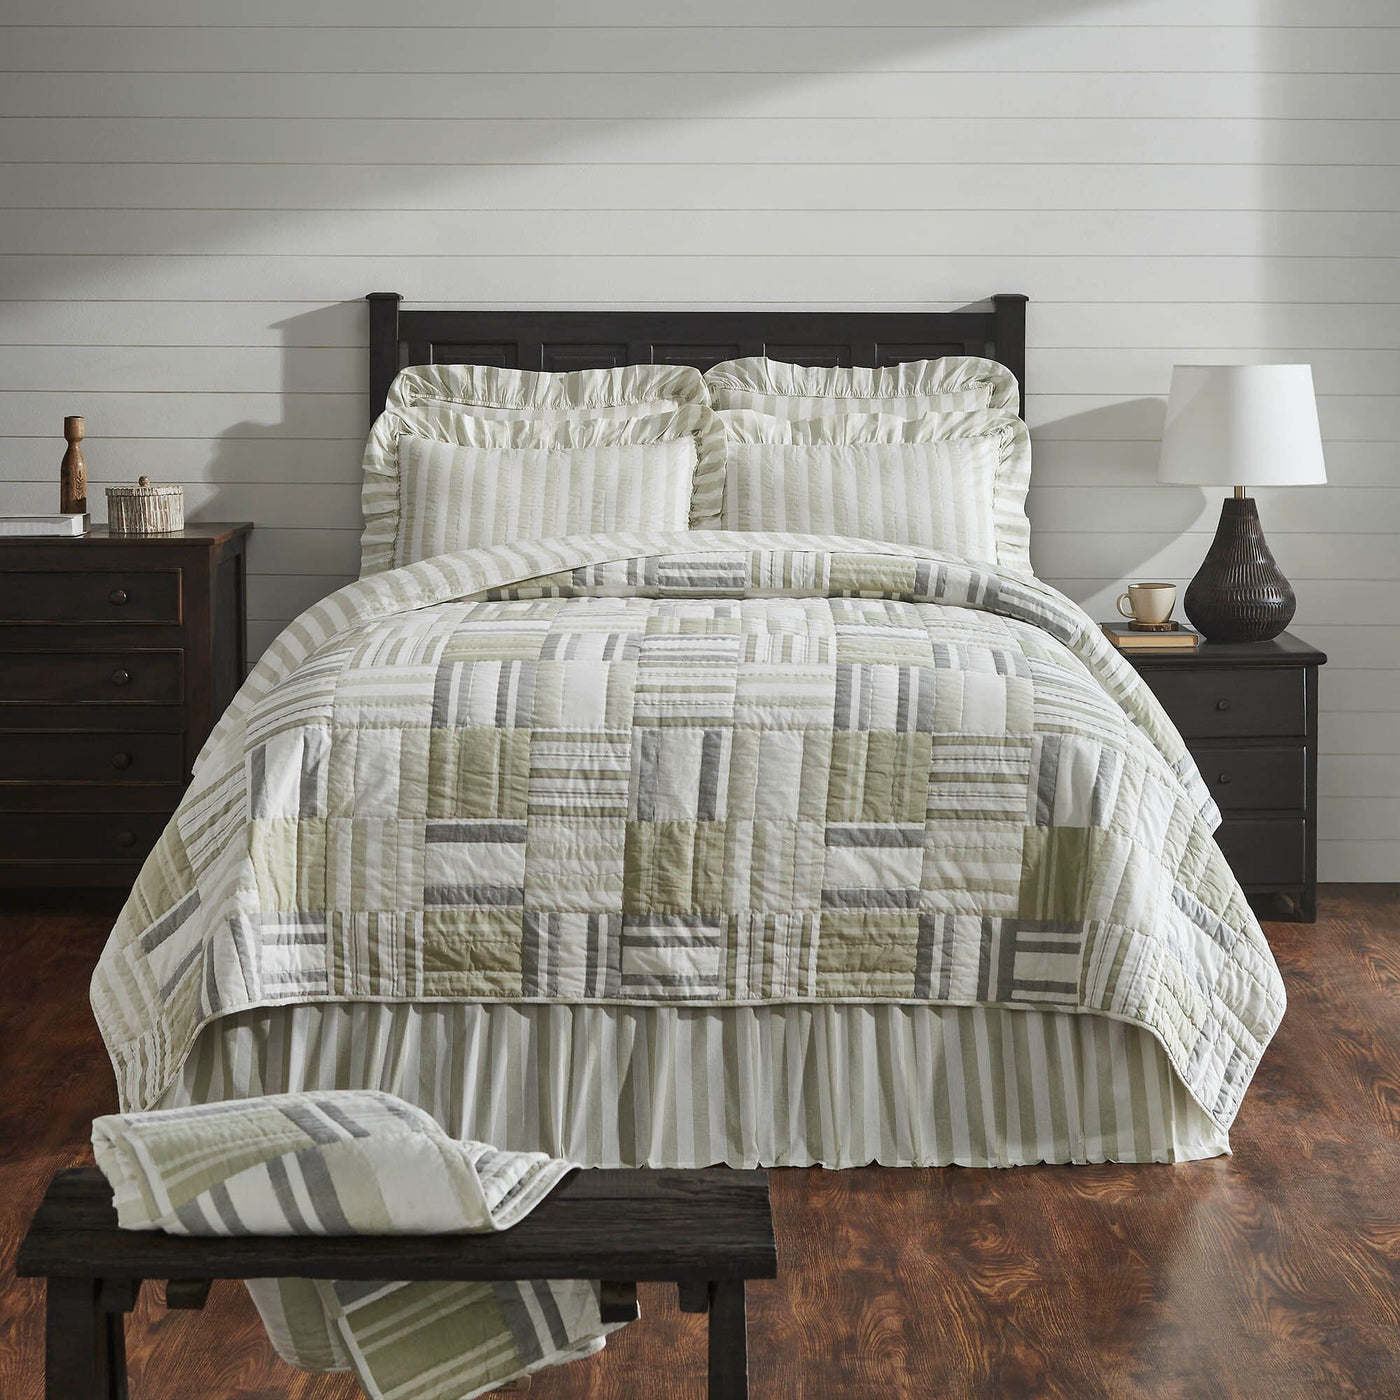 Finders Keepers Bedding